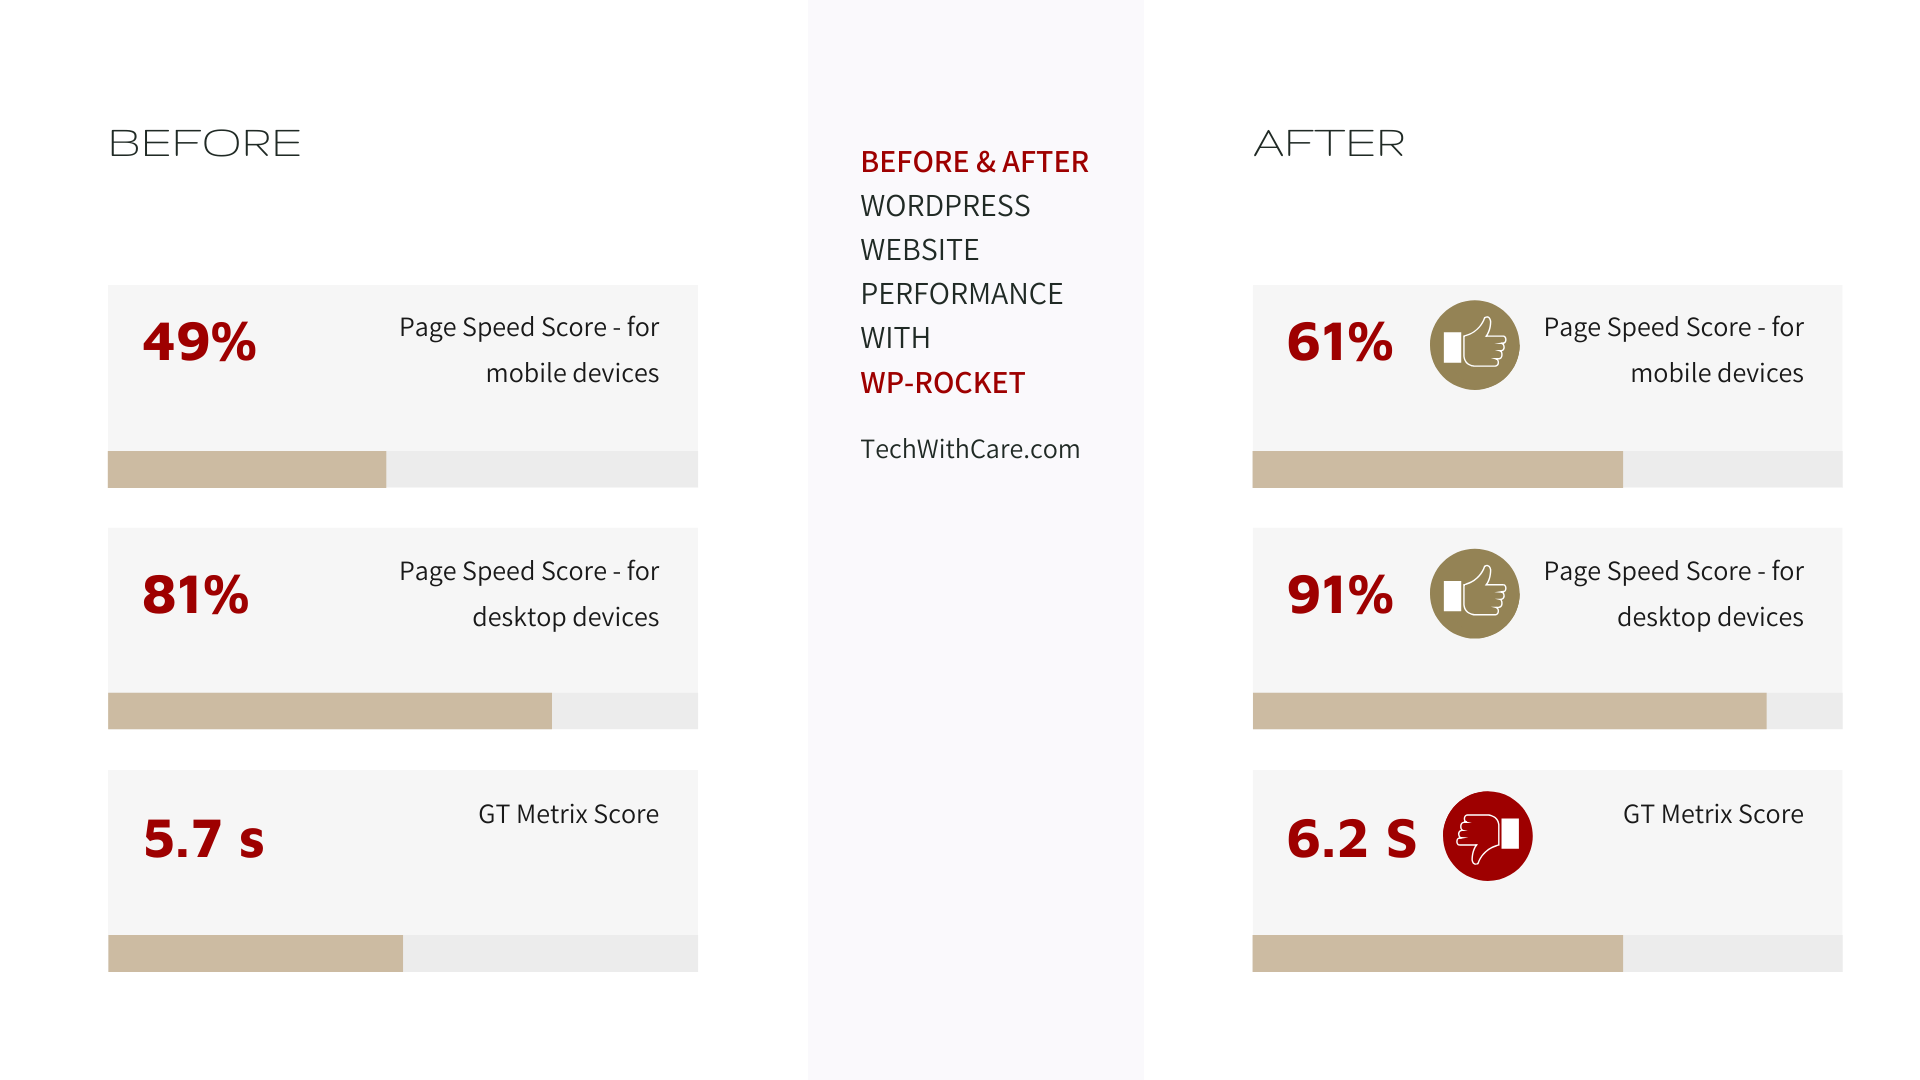 WP-Rocket before and after